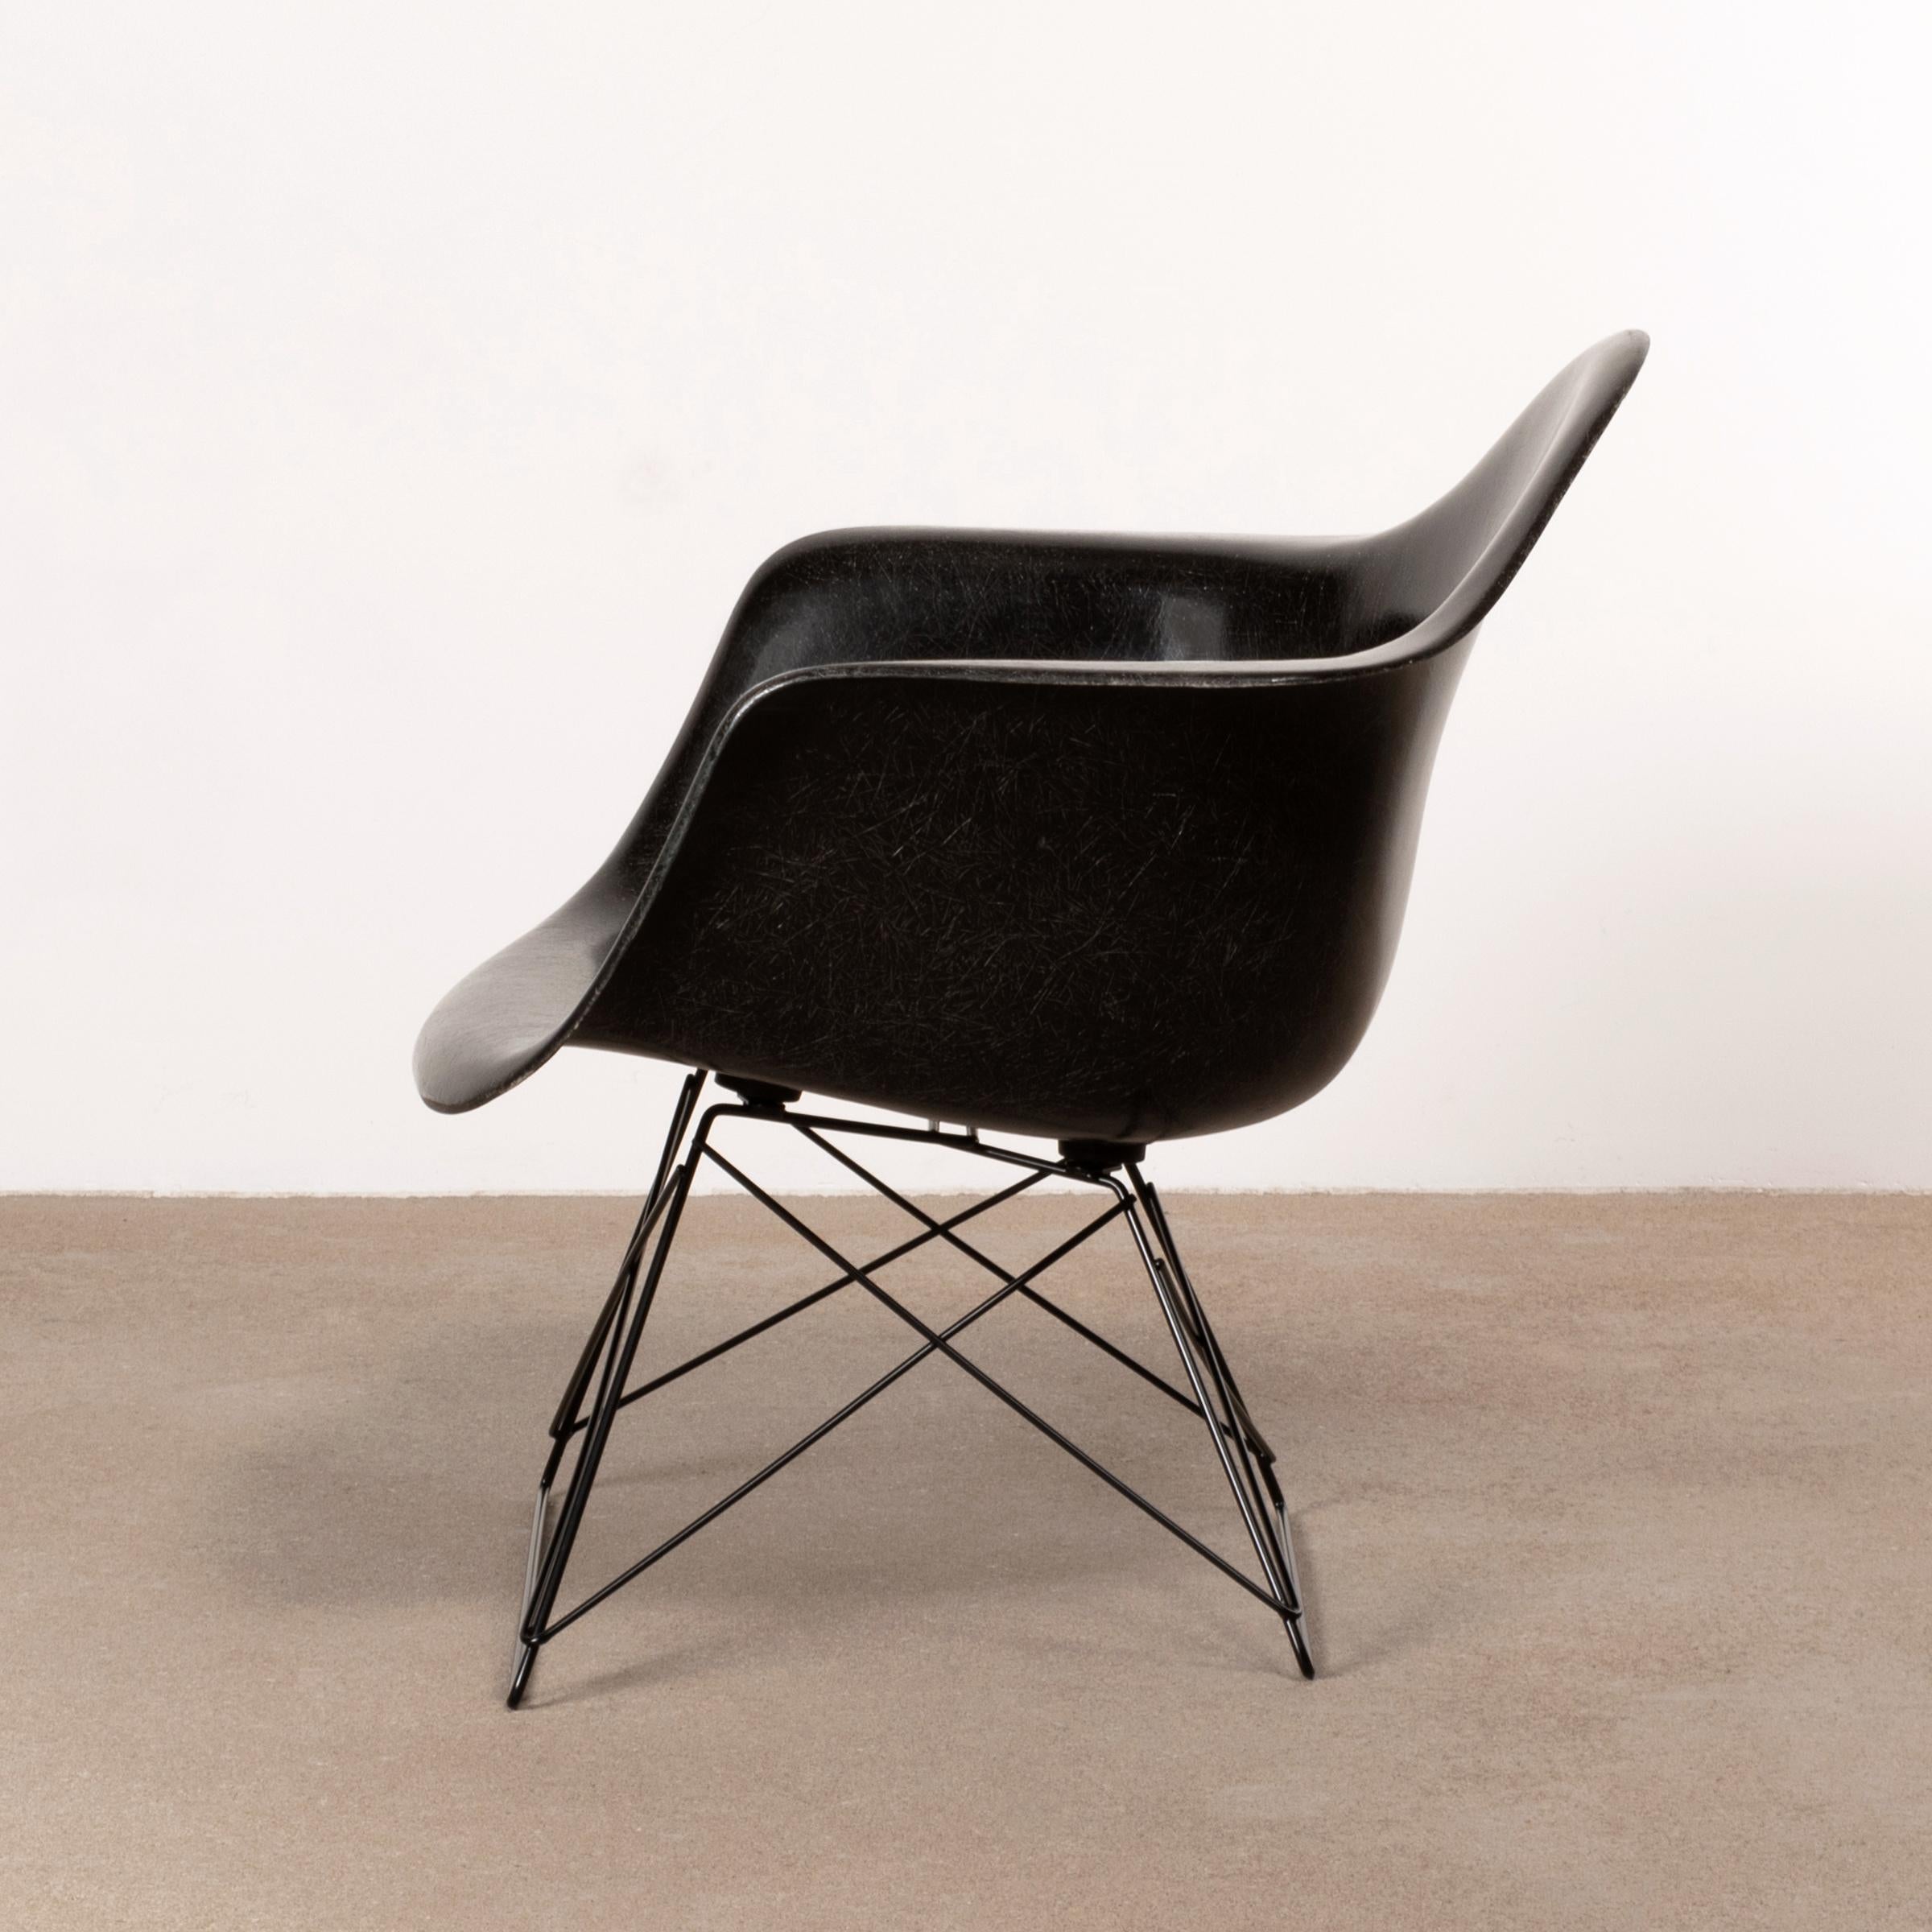 Cast Charles & Ray Eames Black LAR Lounge Chair, Herman Miller, 1960s